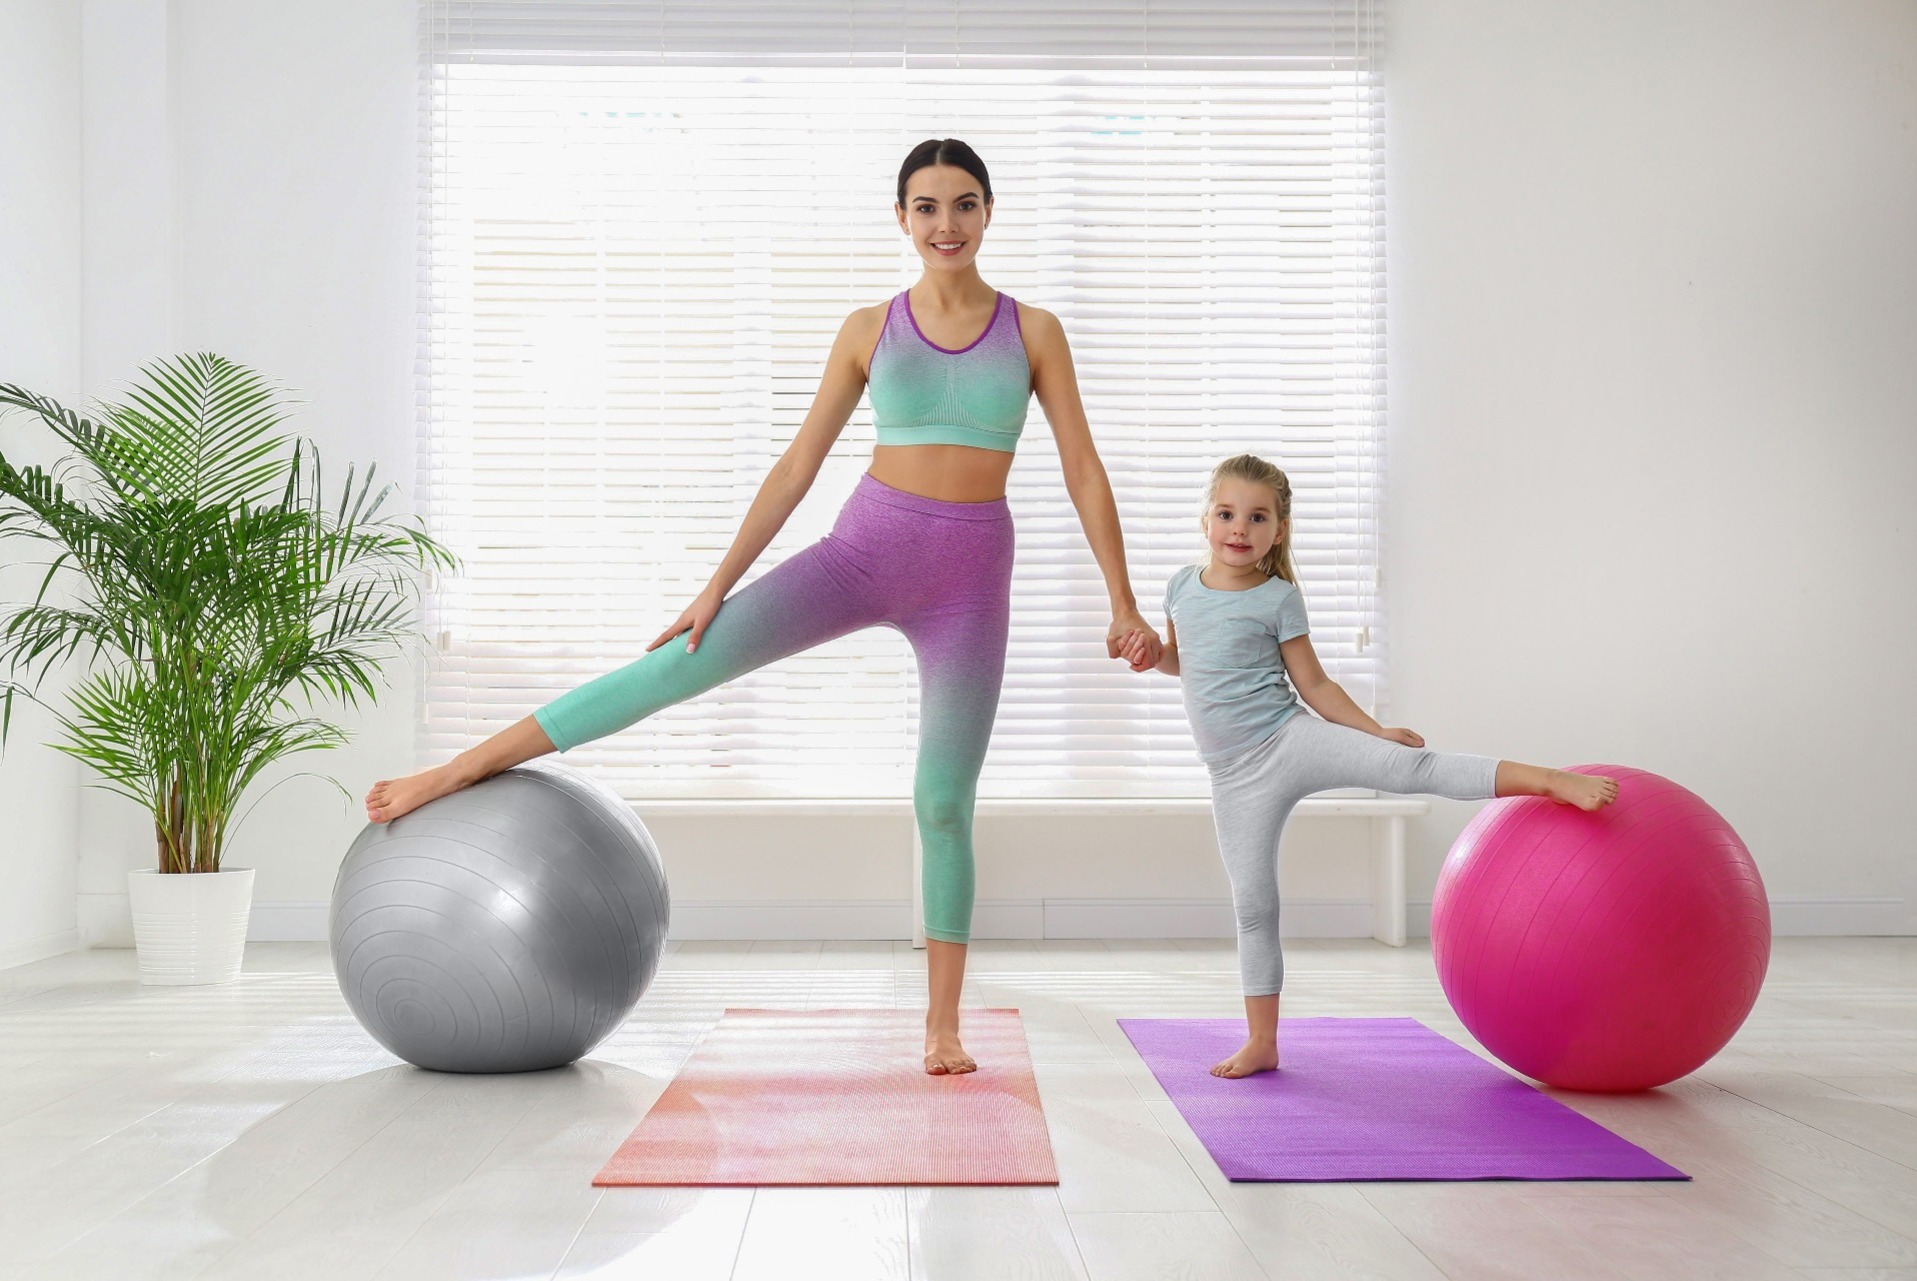 A woman and a young girl exercising with yoga mats and large exercise balls inside a house.